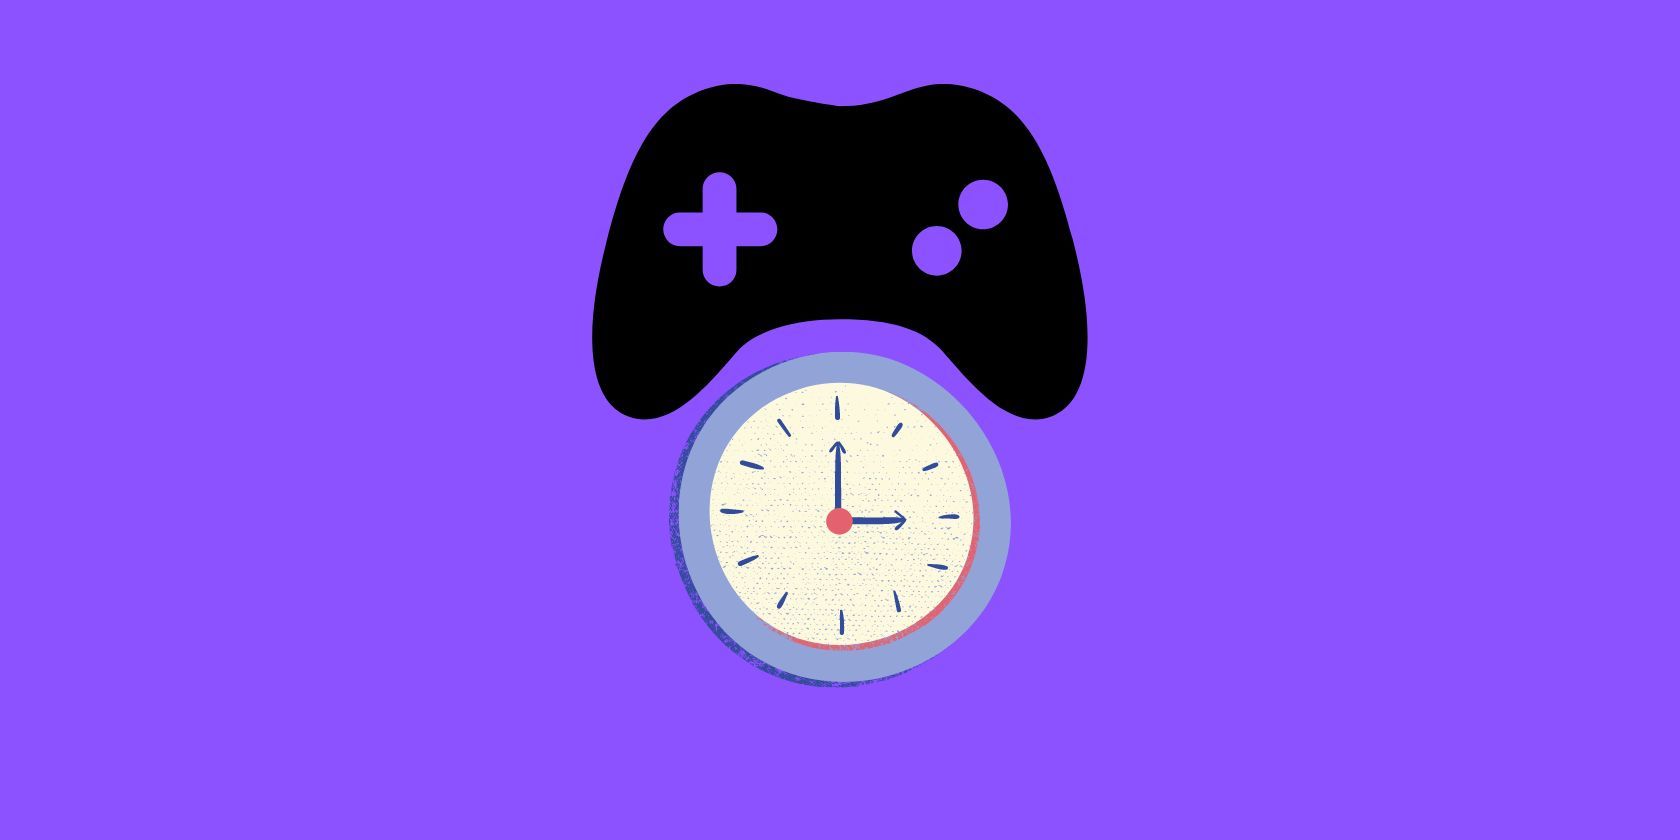 A video game controller vector with a clock illustration underneath on a purple background